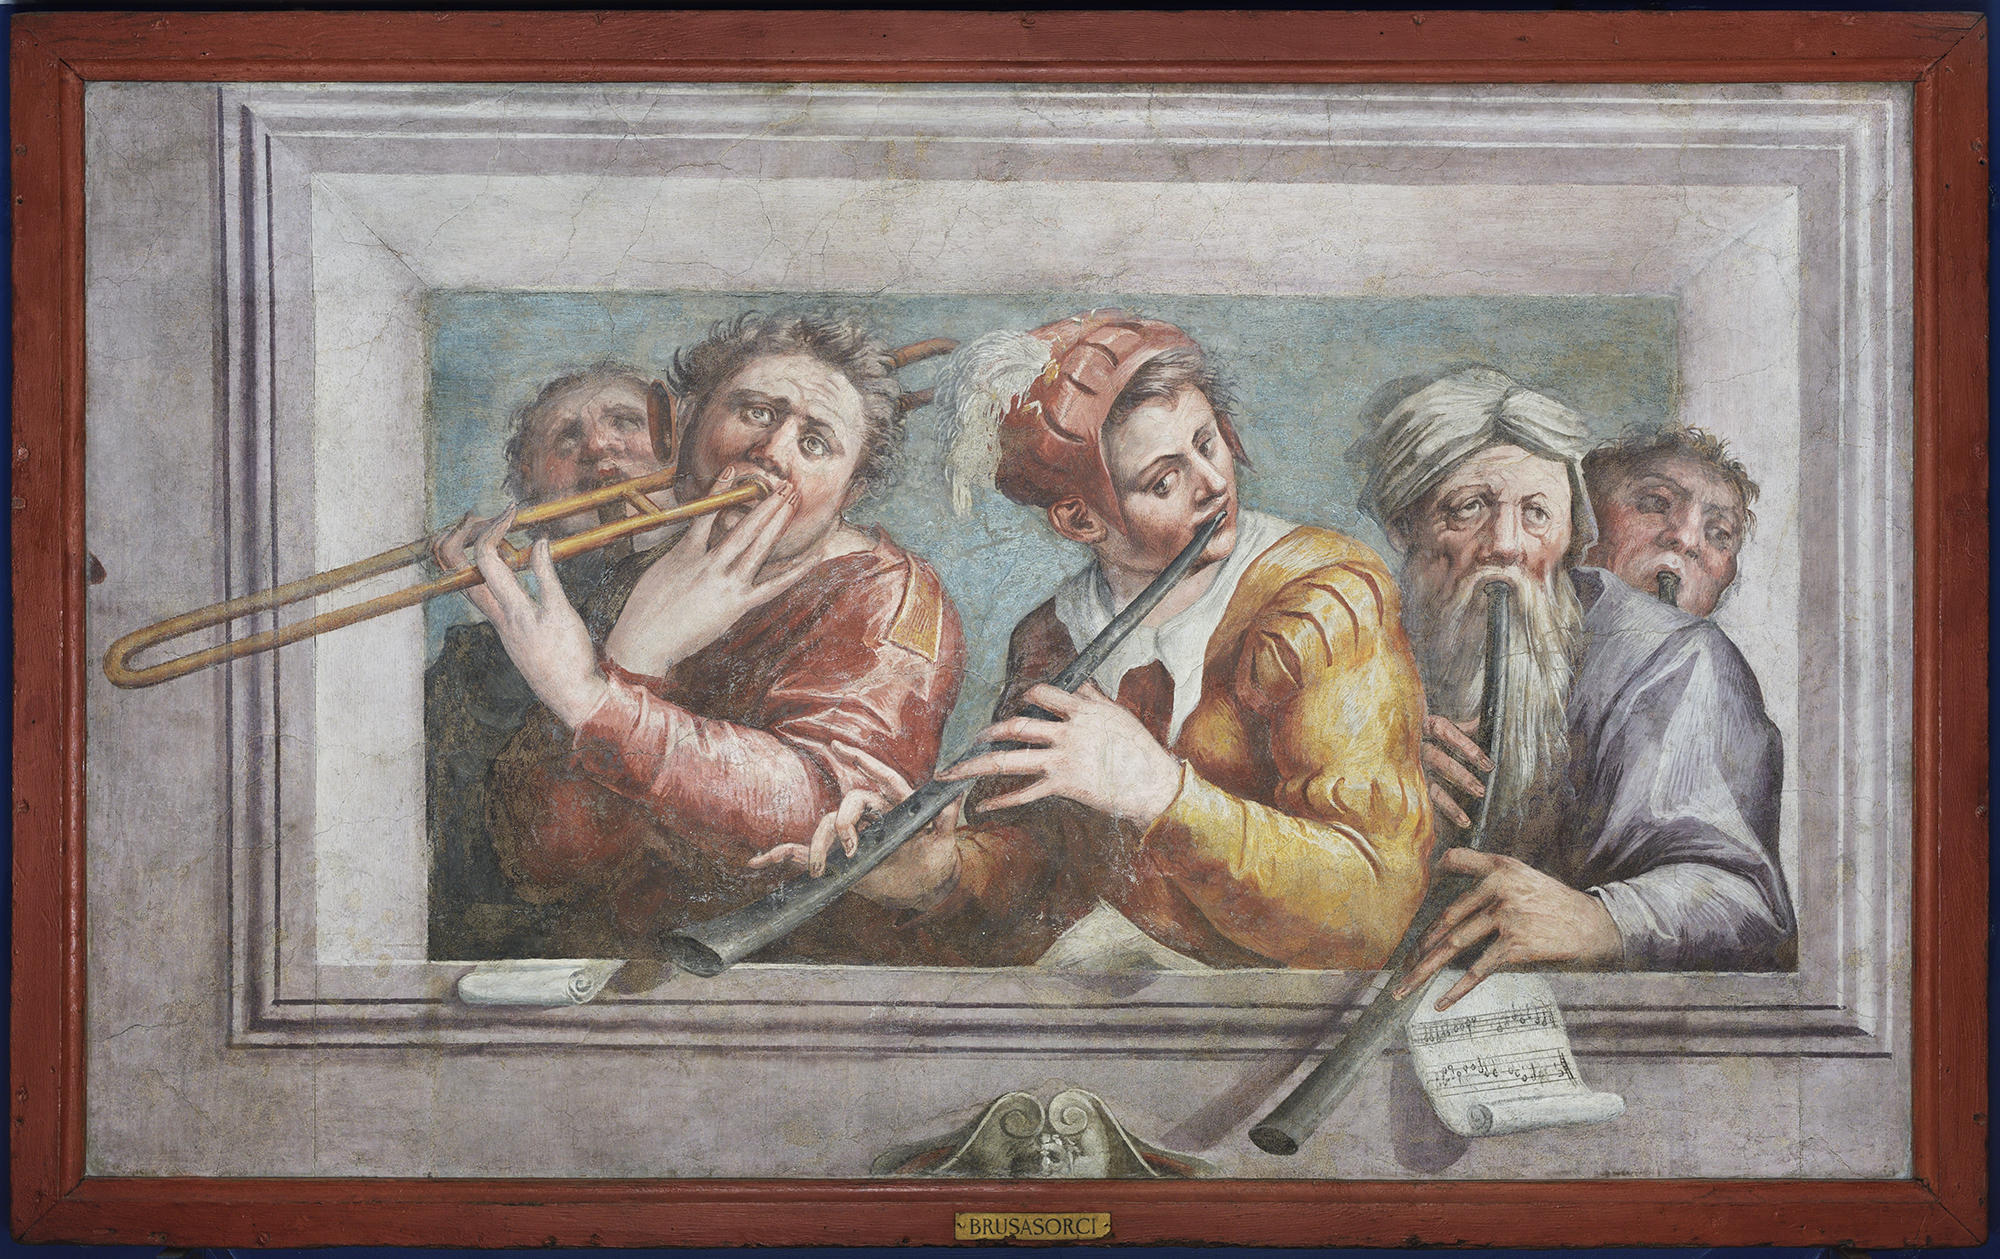 A fresco of three musicians playing wind instruments.